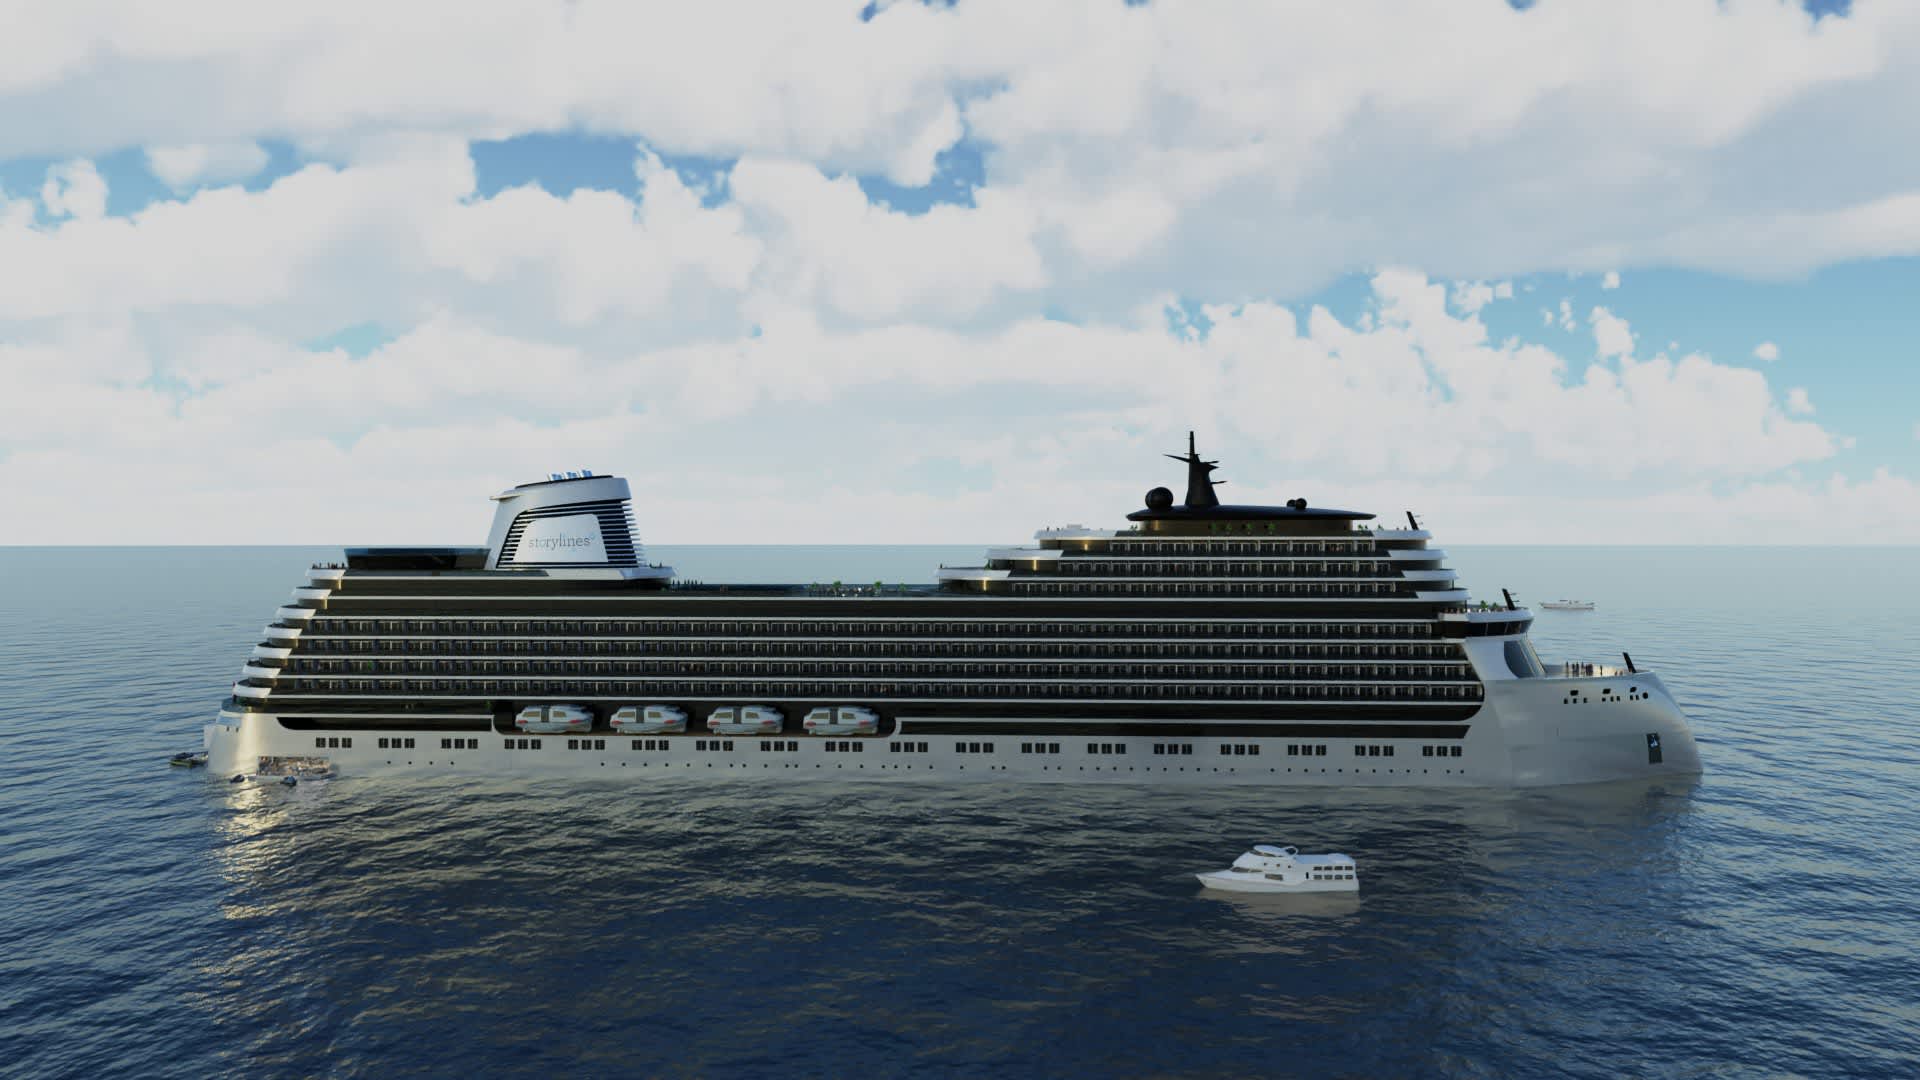 The MV Narrative, the first cruise ship from operator Storylines, is scheduled to set sail from Croatia in 2025.